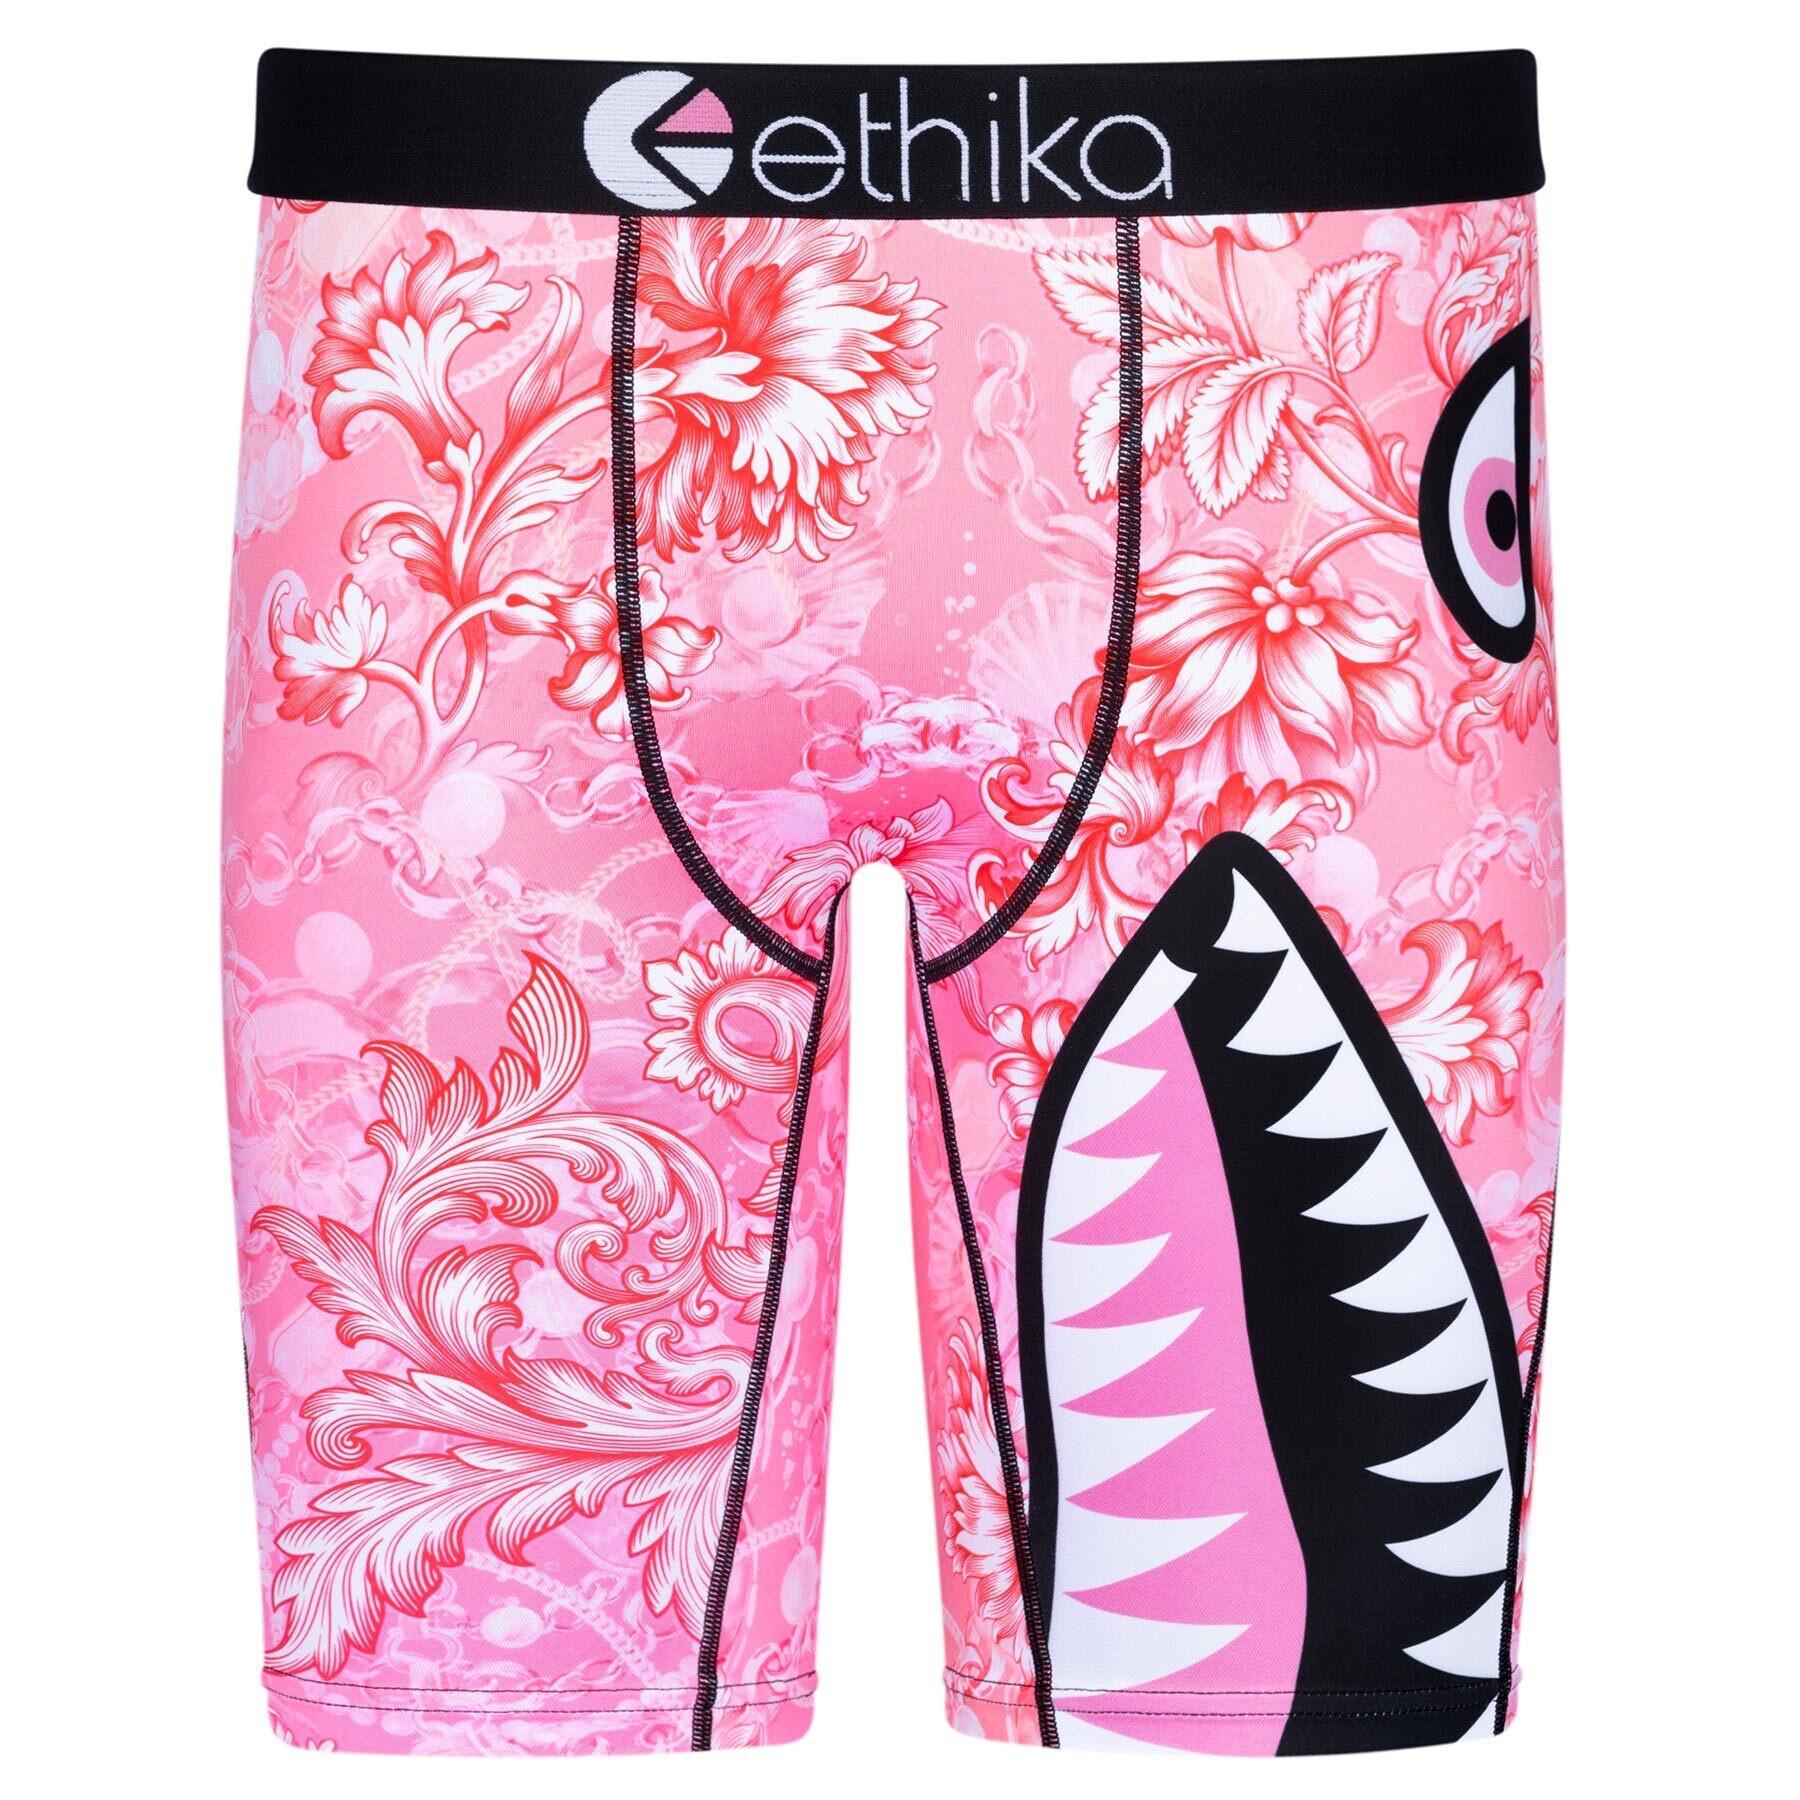 Ethika: Support Breast Cancer Awareness